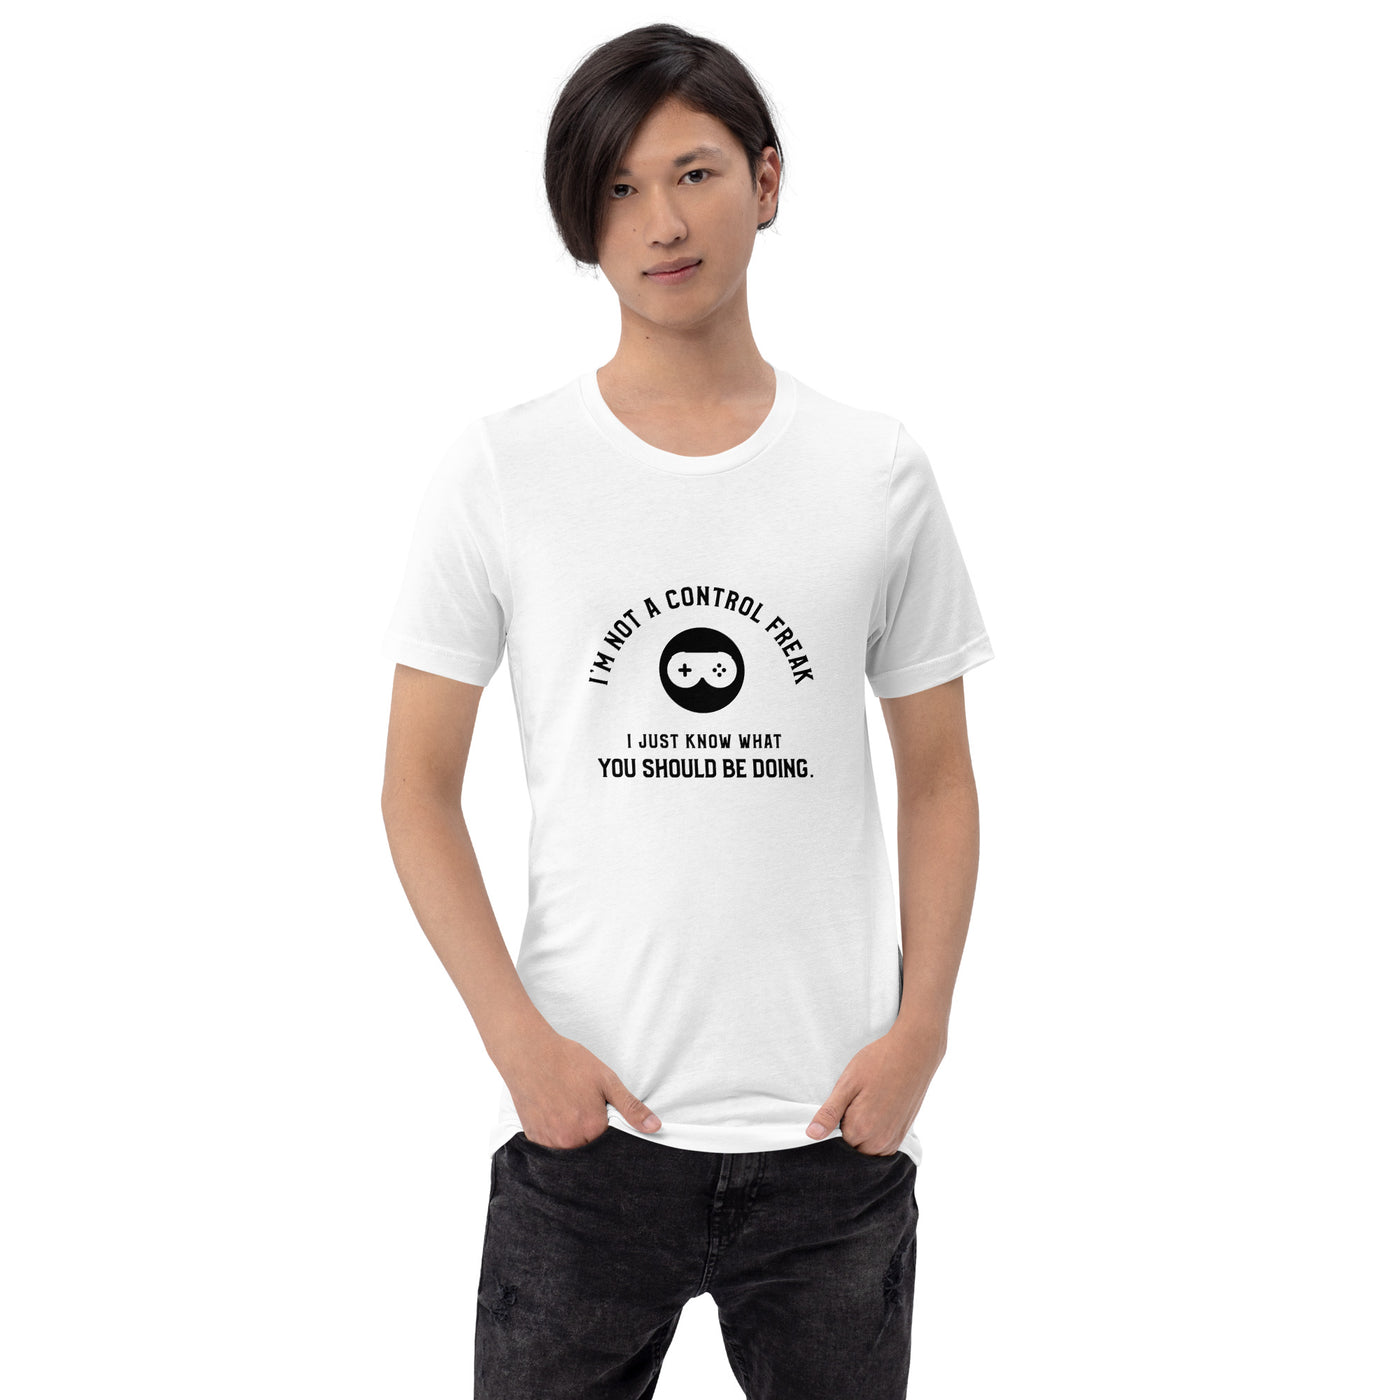 I am not a Control freak, I just Know what you should be doing - Unisex t-shirt